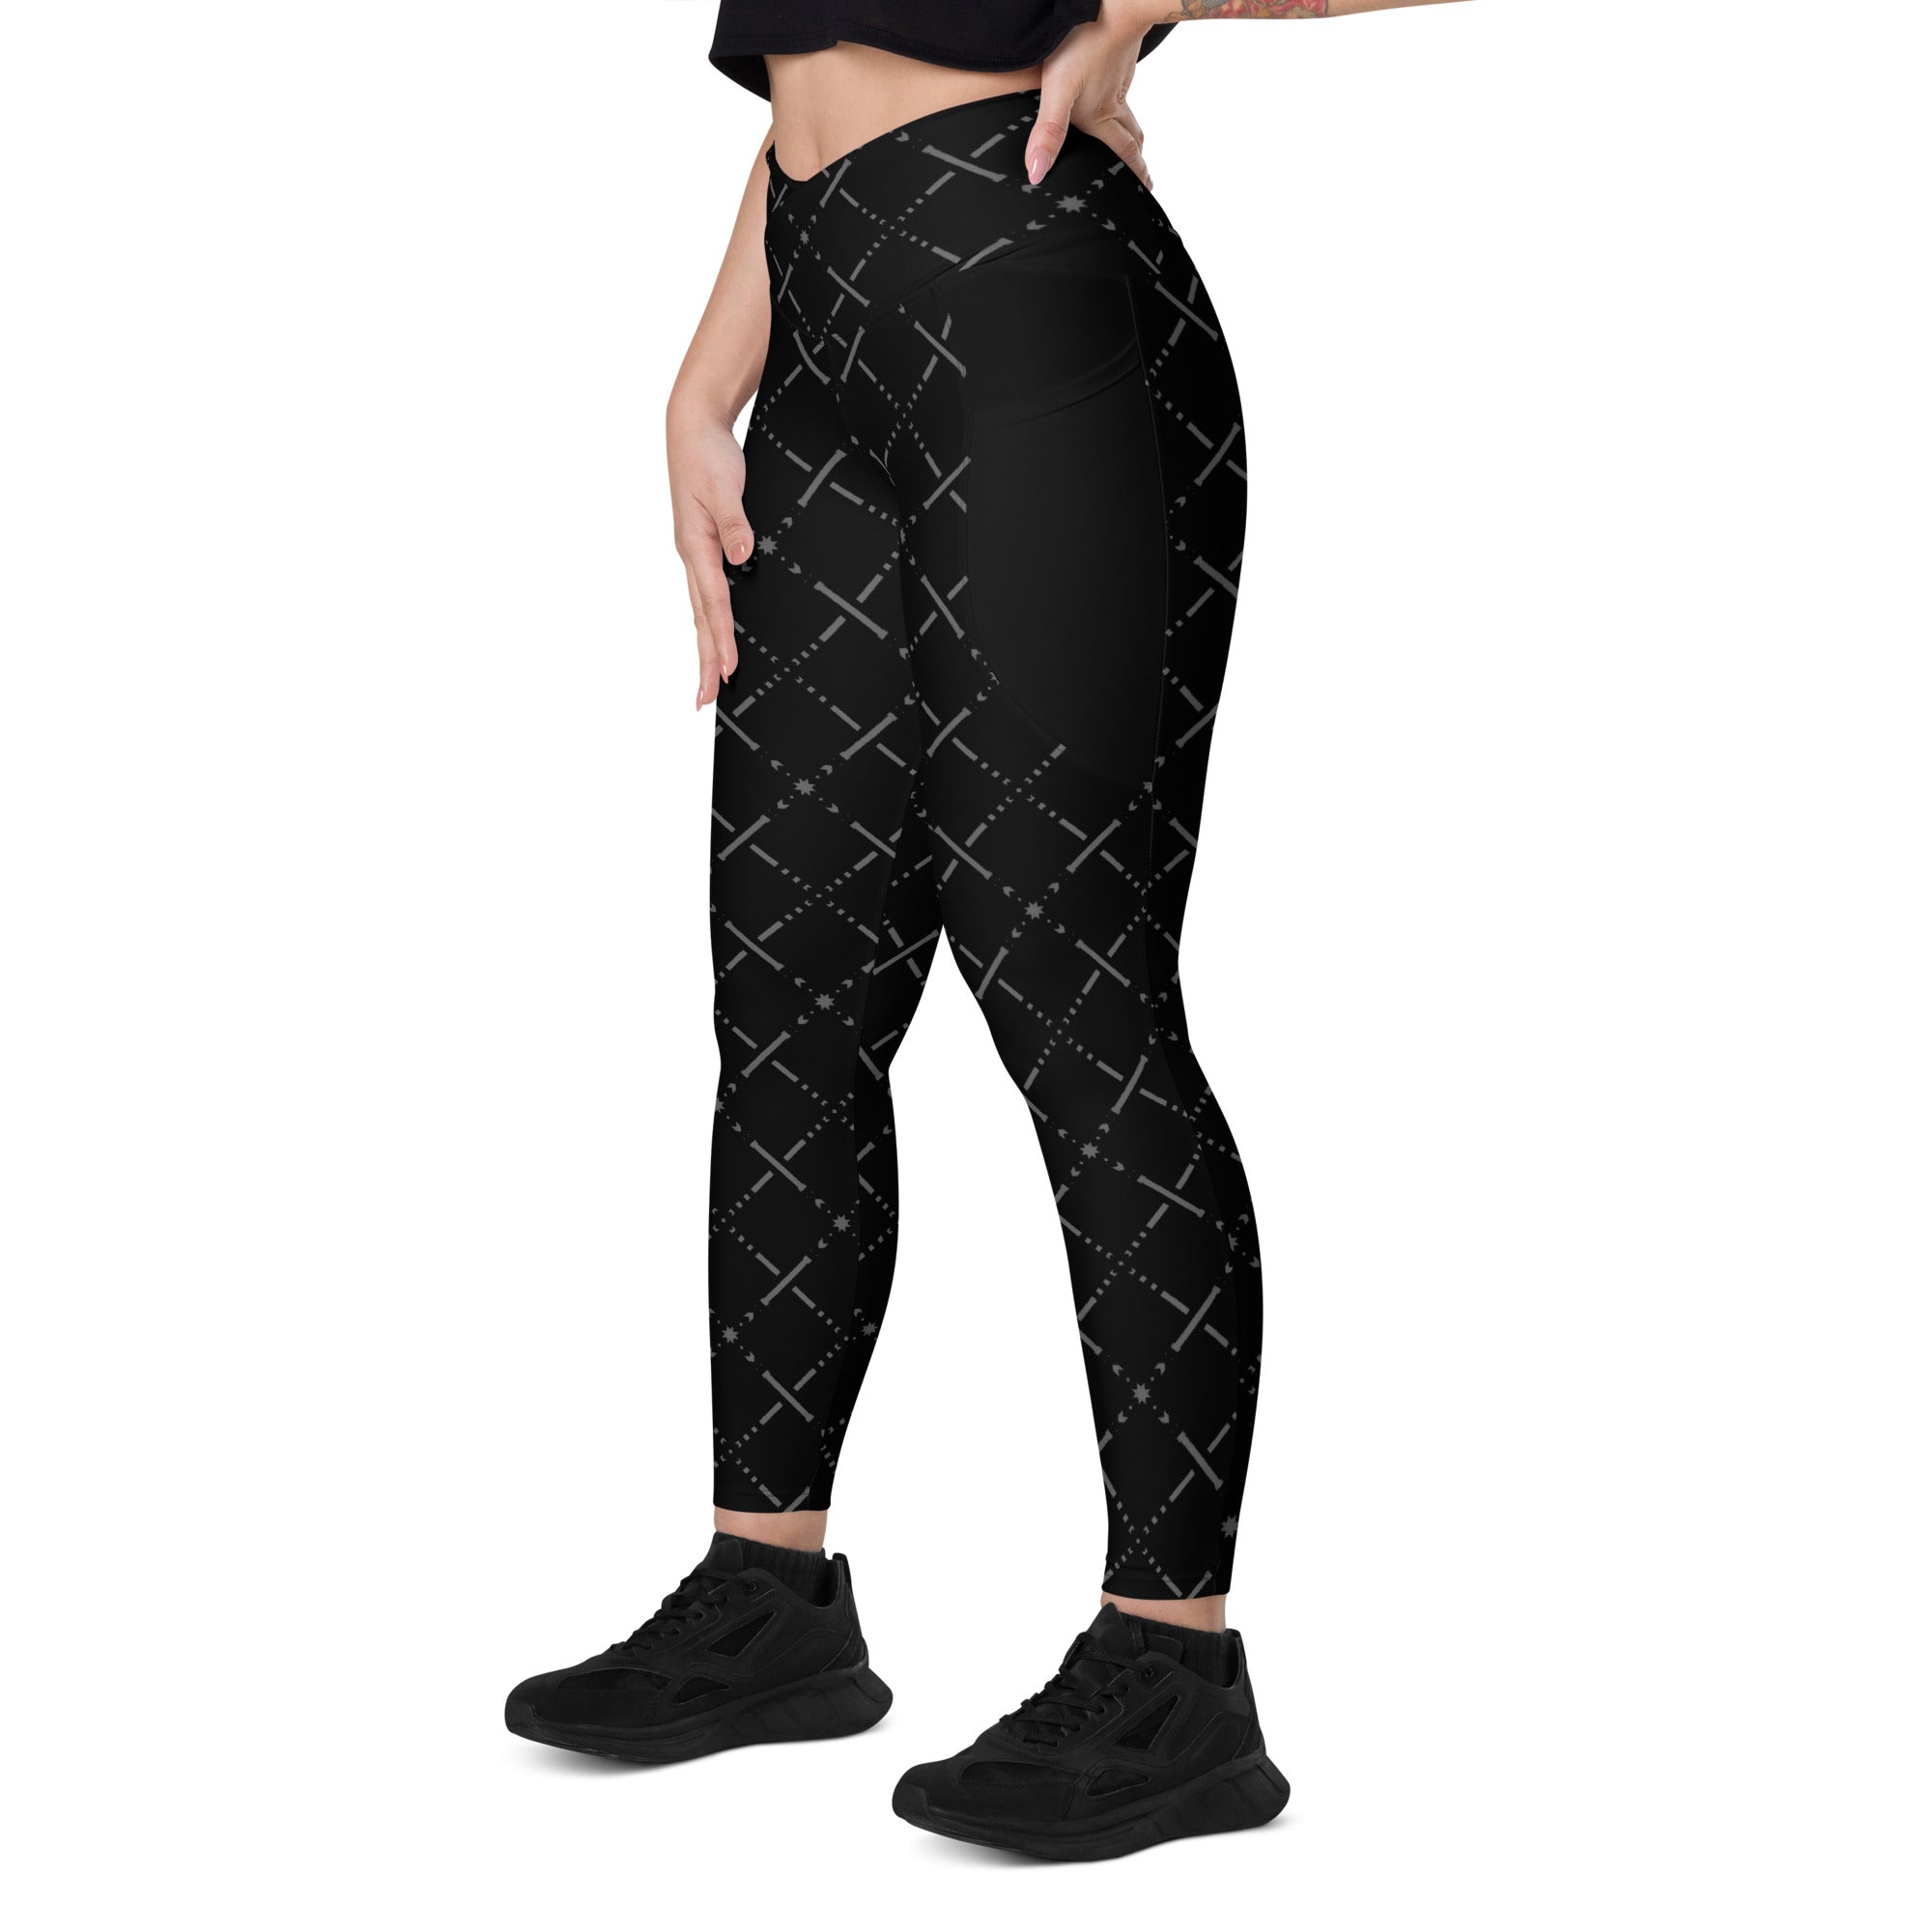 Stylish Neon Nights Crossover Leggings laid flat showing unique design.